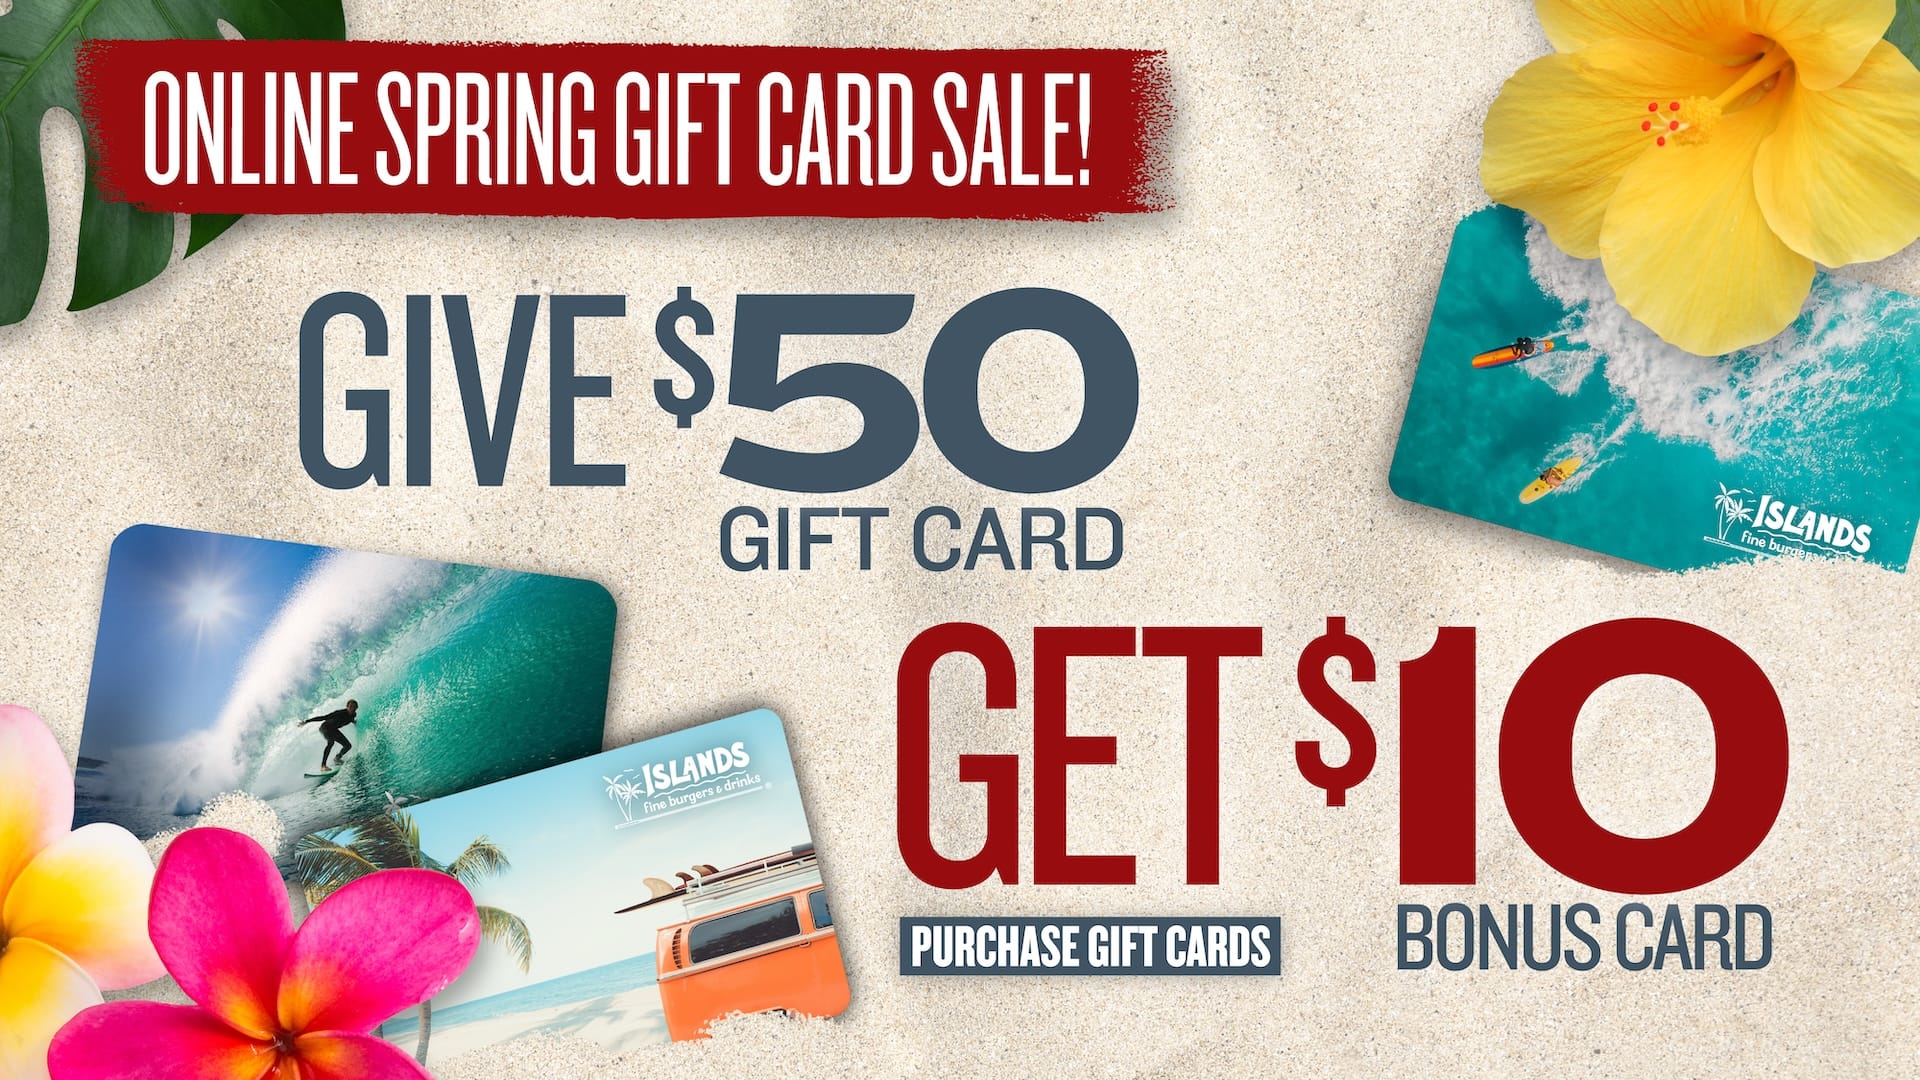 Online Summer Gift Card Sale! Give $50 gift card Get $10 Bonus Card - Purchase Gift Cards